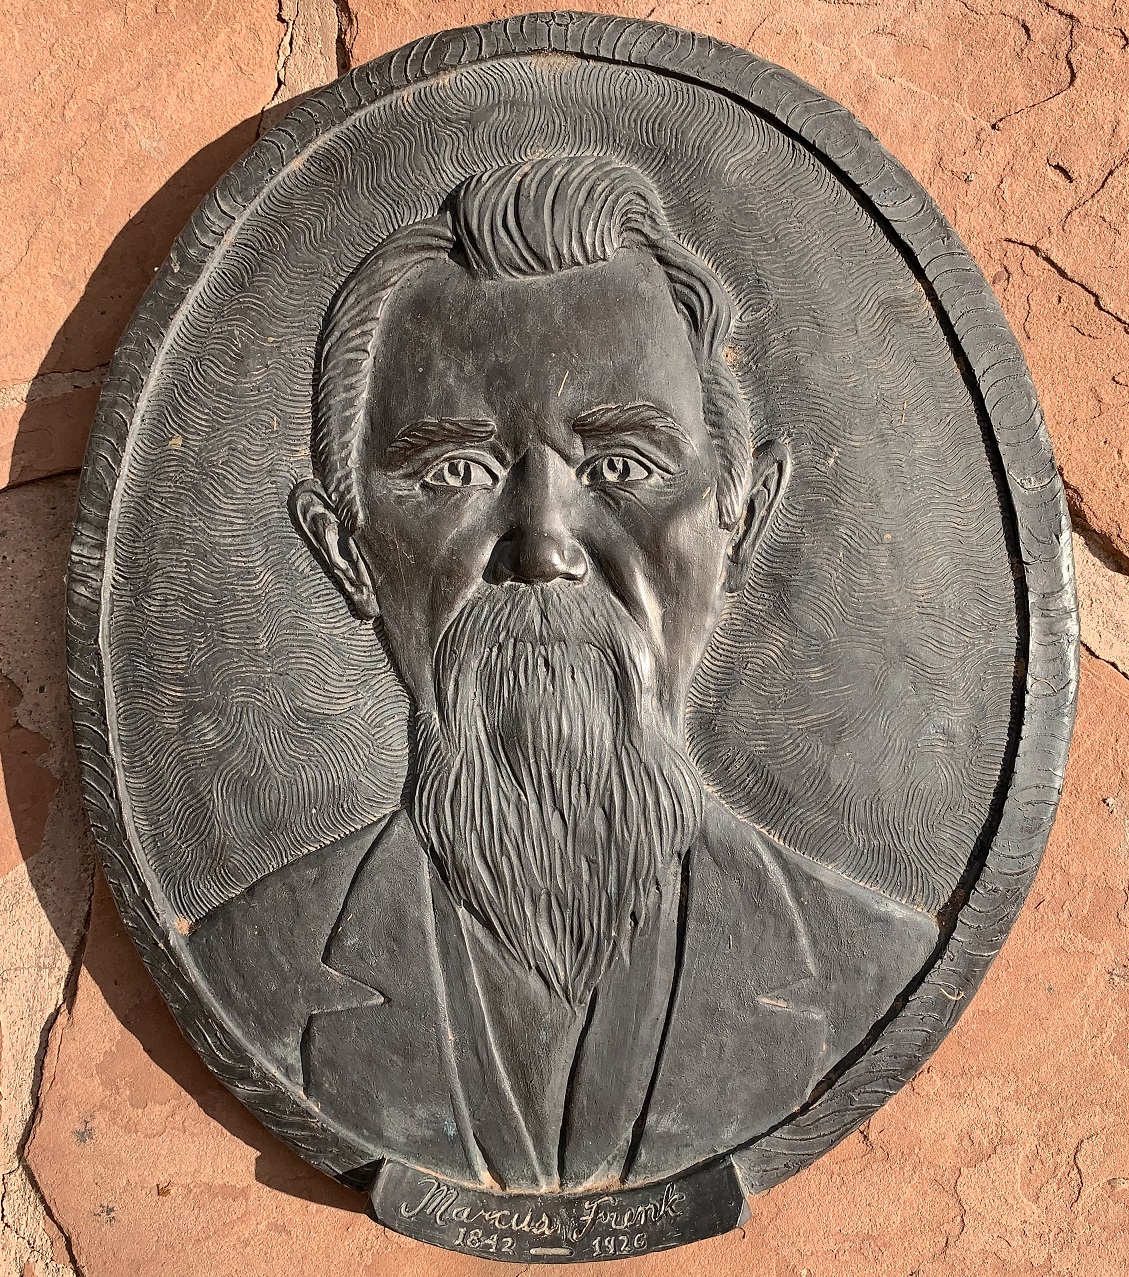 Face plaque of Marcus Funk at the Monument Plaza in Washington, Utah